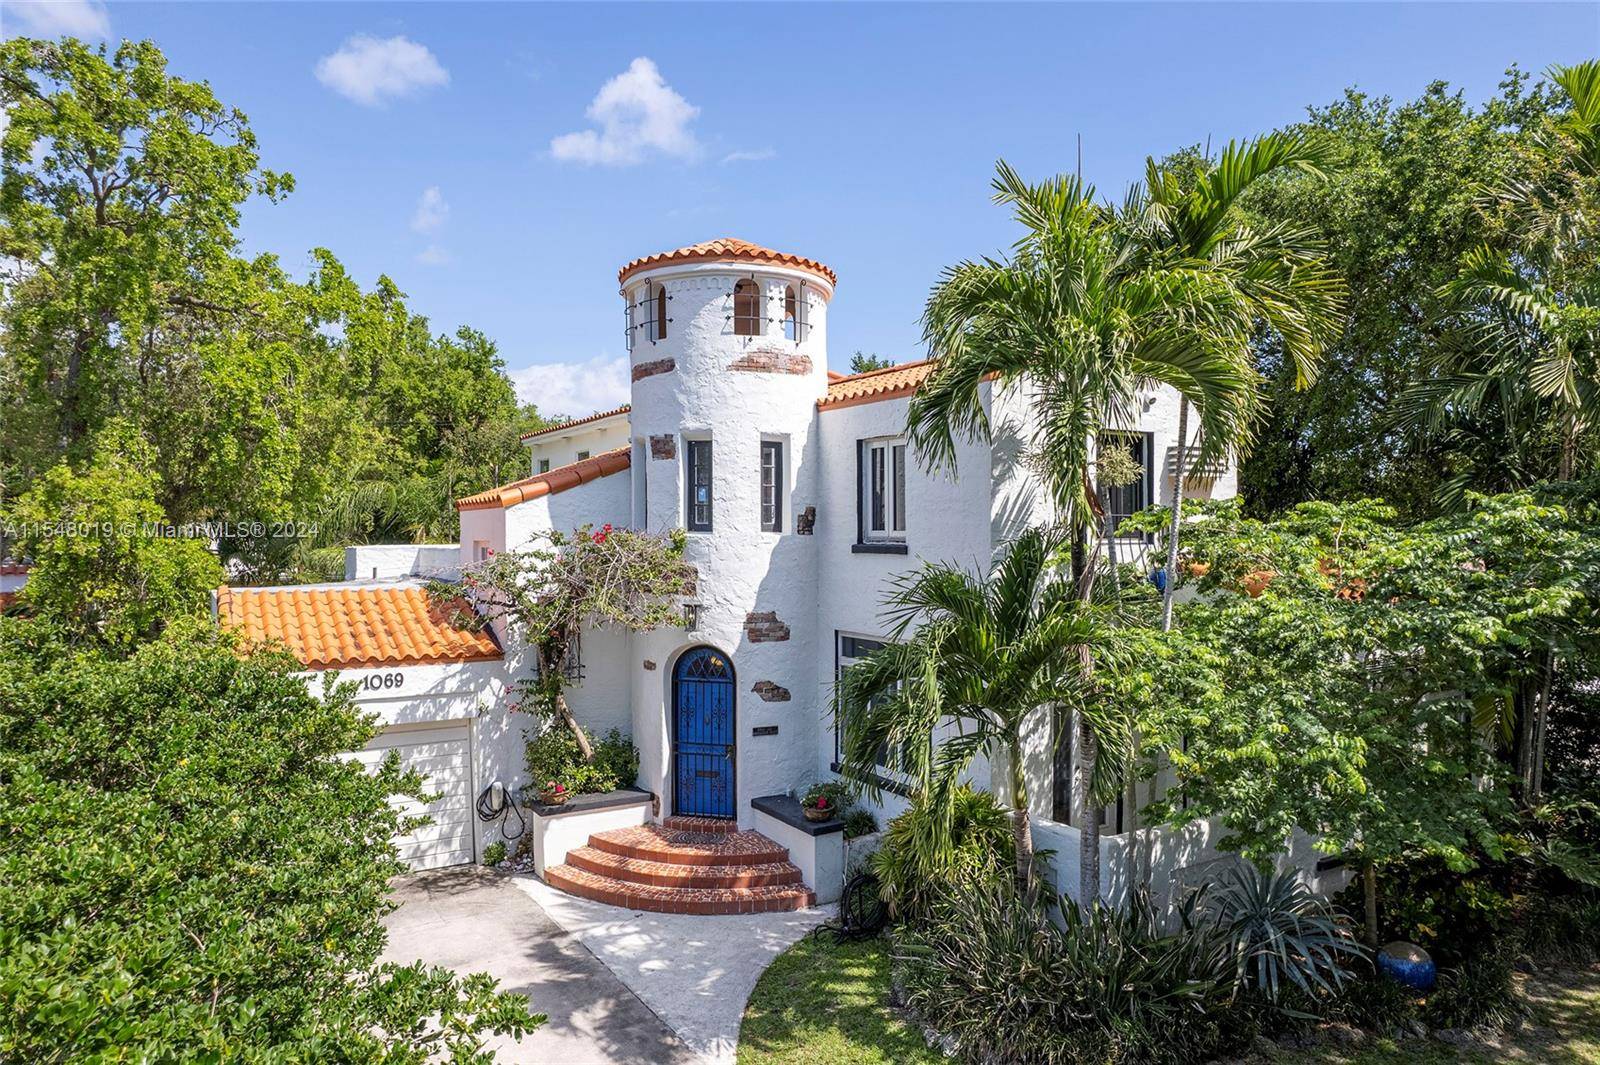 Charming authentic Old Spanish style home located in the quiet exclusive Watersedge neighborhood of Miami Shores.